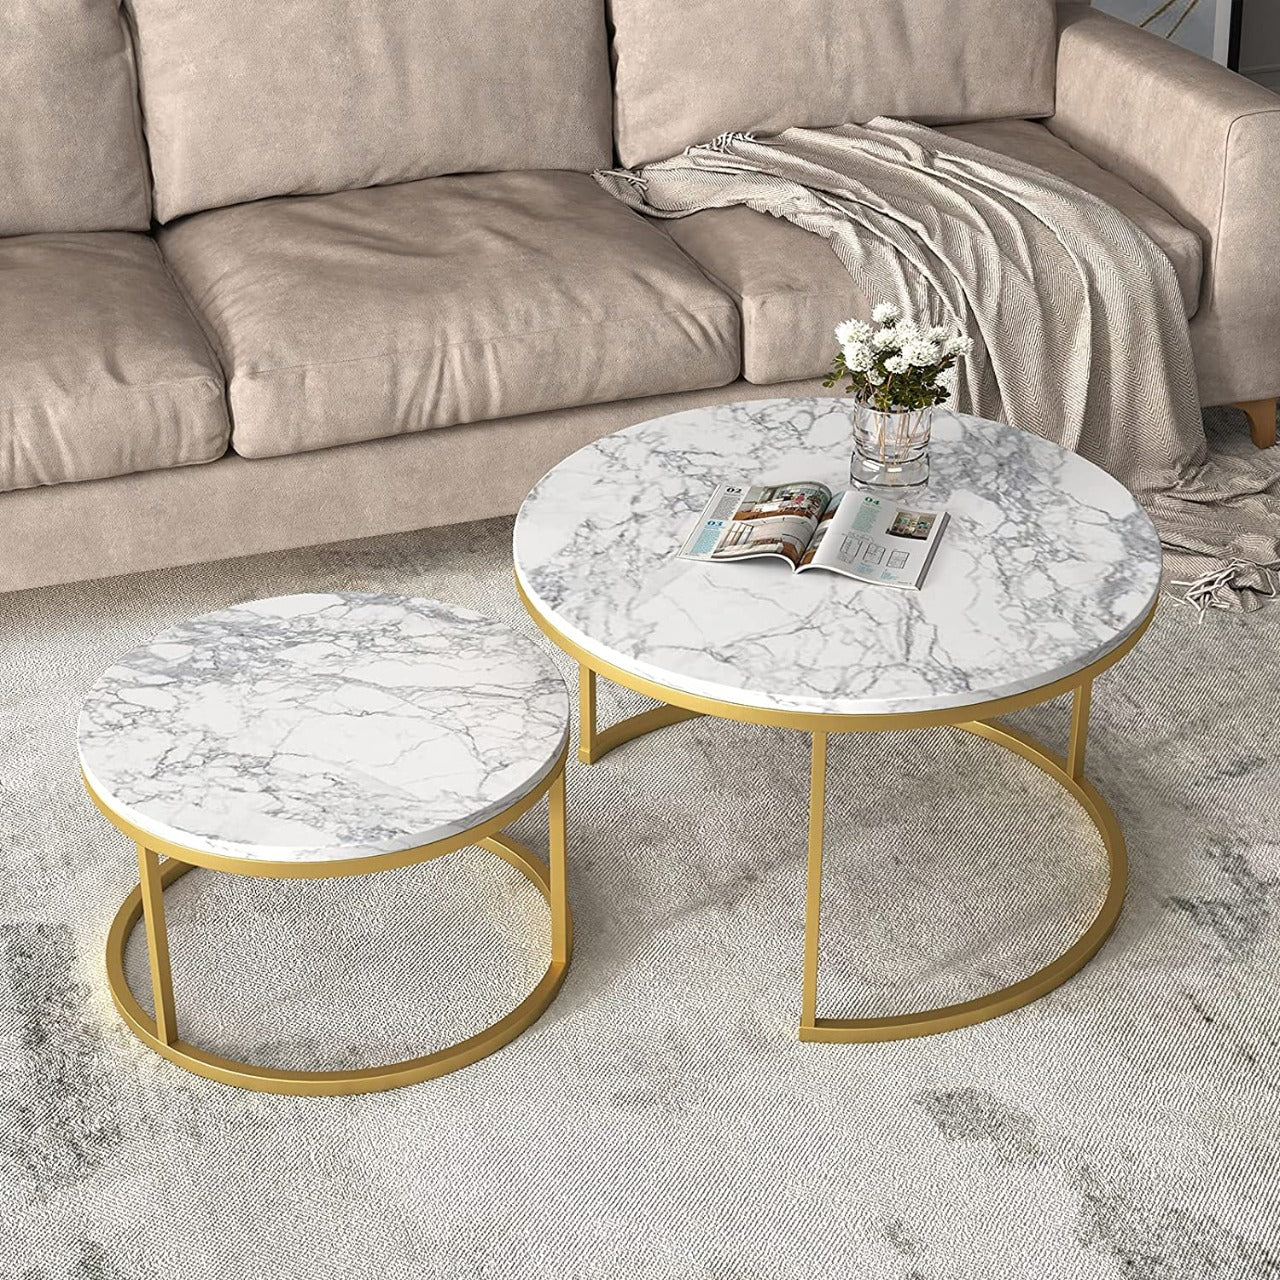 Nest Of Tables, Nested Table, Nesting Table, Nest Of Coffee Tables, Nested Coffee Table, Nesting Coffee Table, Nest Of Side Tables, Nesting Tables Set Of 3, Nest Of Side Tables, Nest Tables Online, Marble Nest Of tables